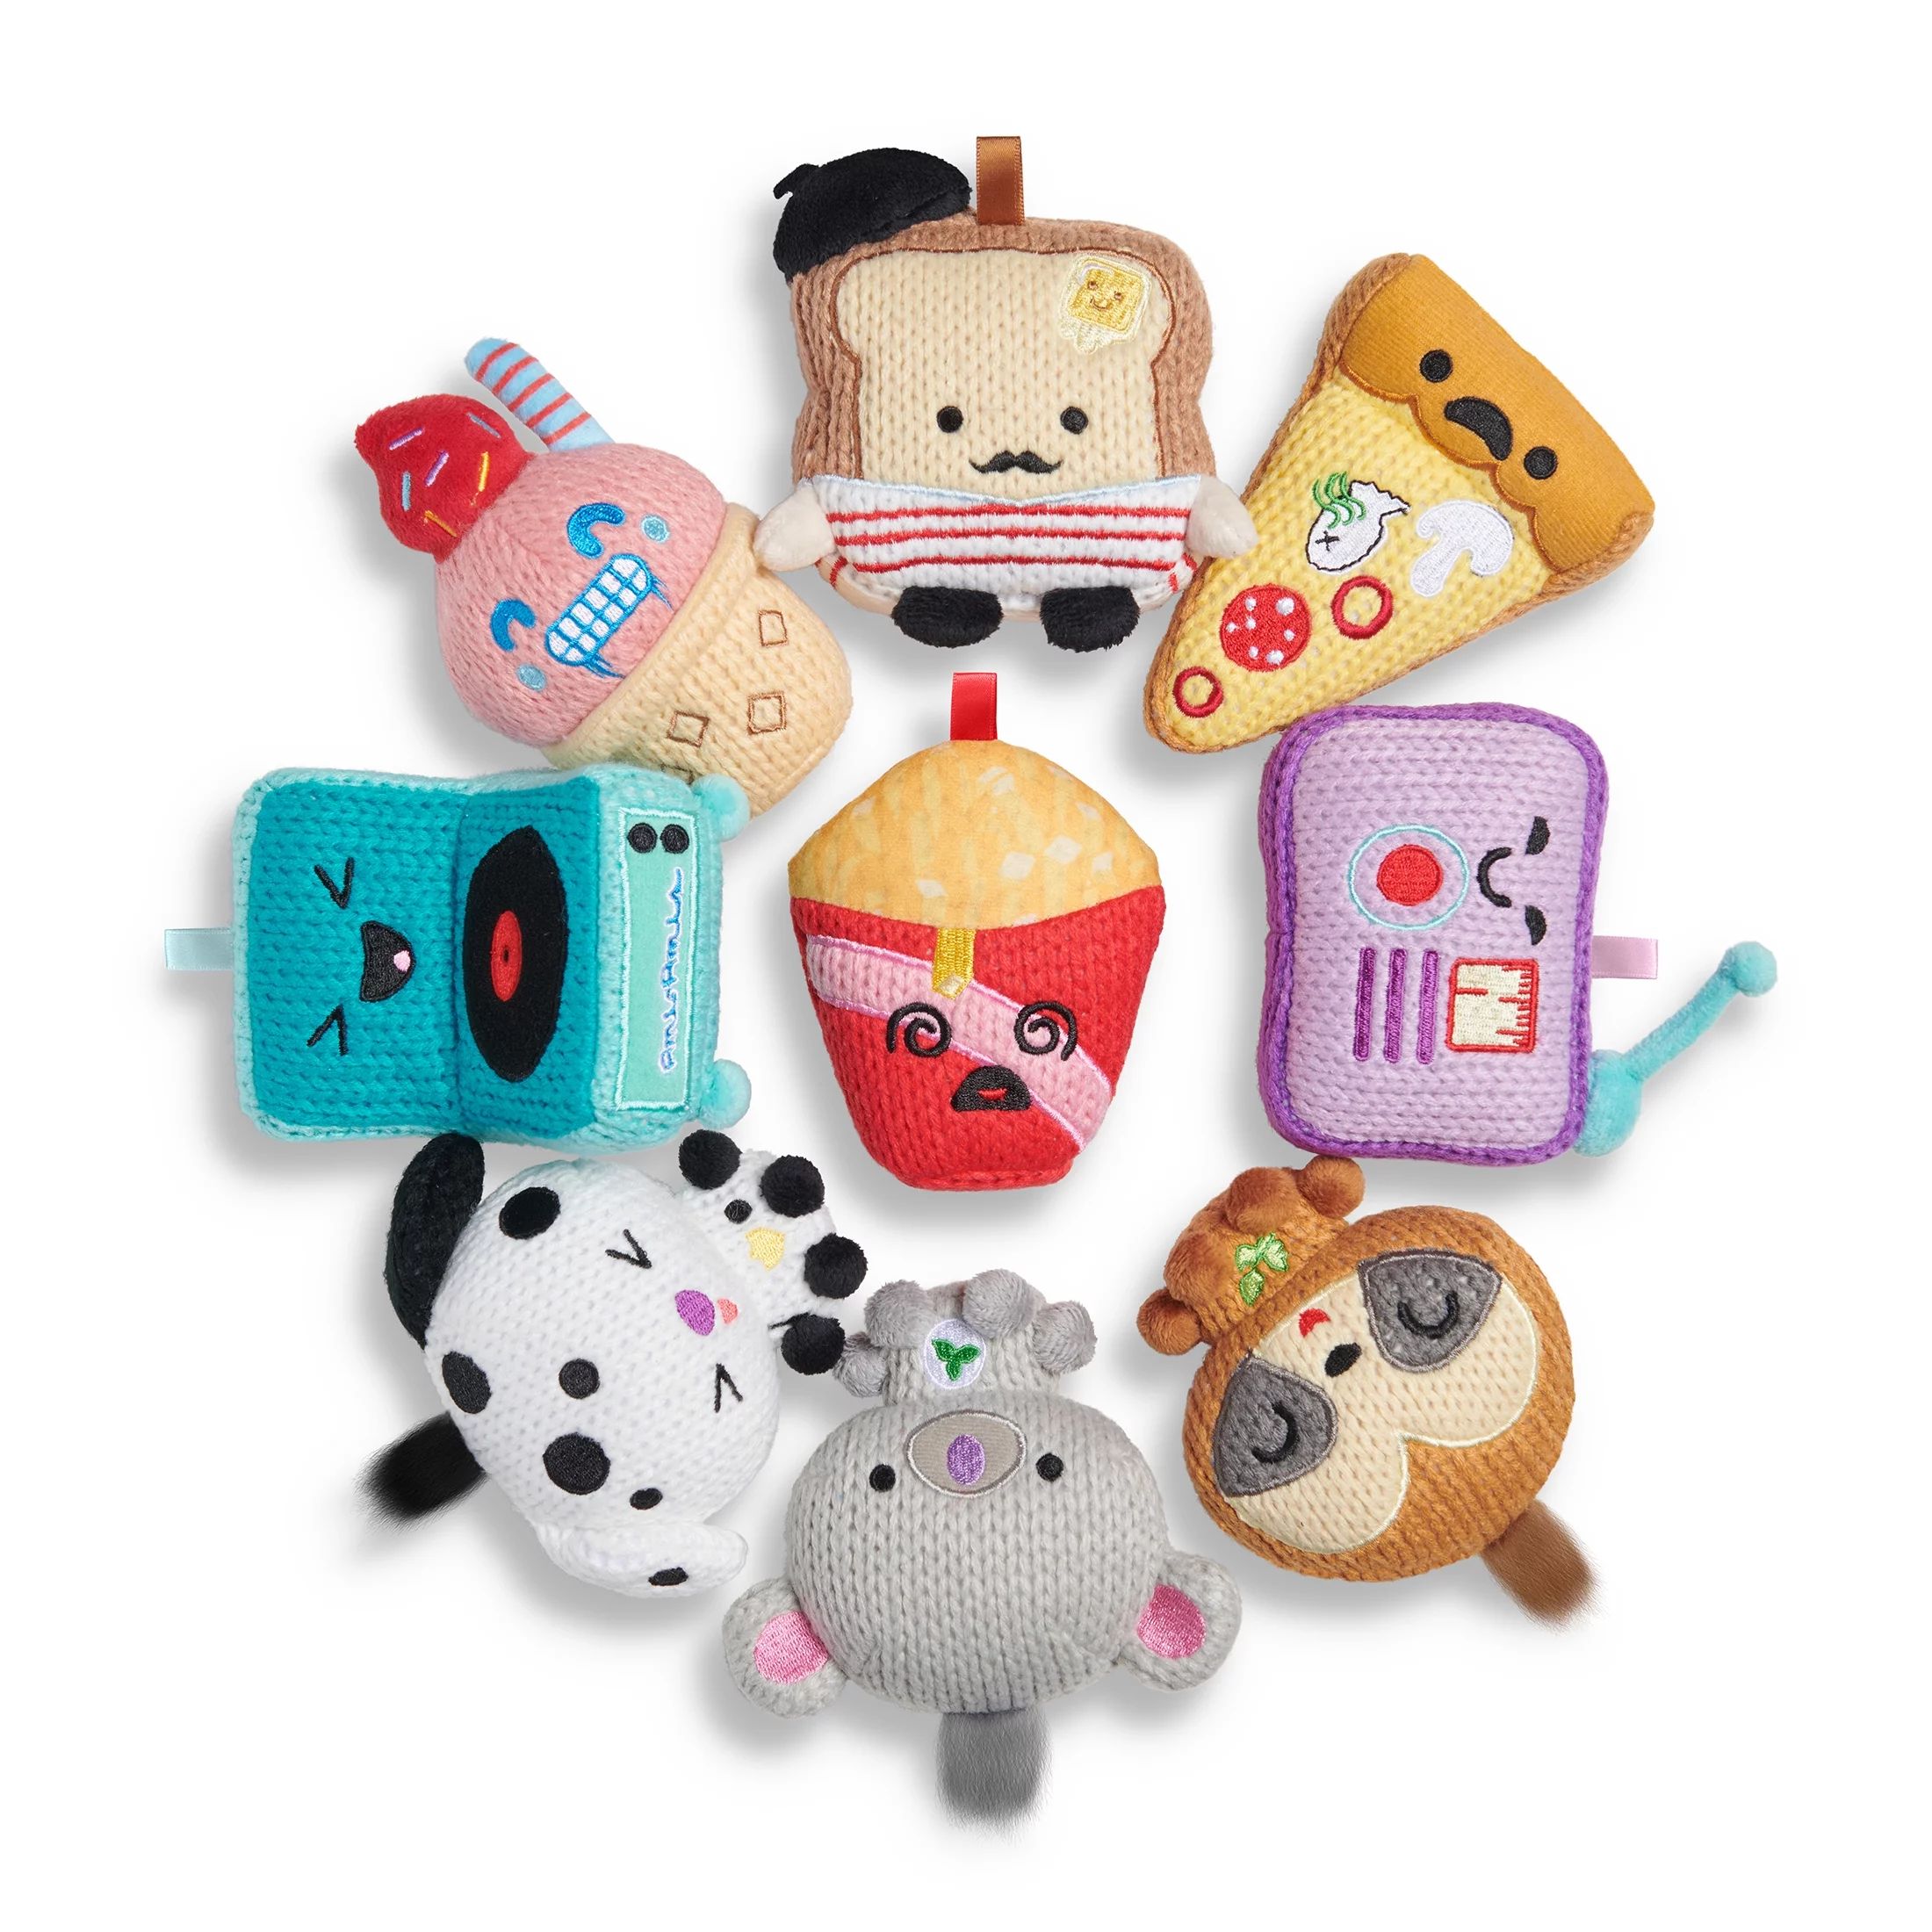 Ami Amis Collectible Toy Knit Plush Assortment Each Case Contains 12 Pieces Collect Them All | Walmart (US)